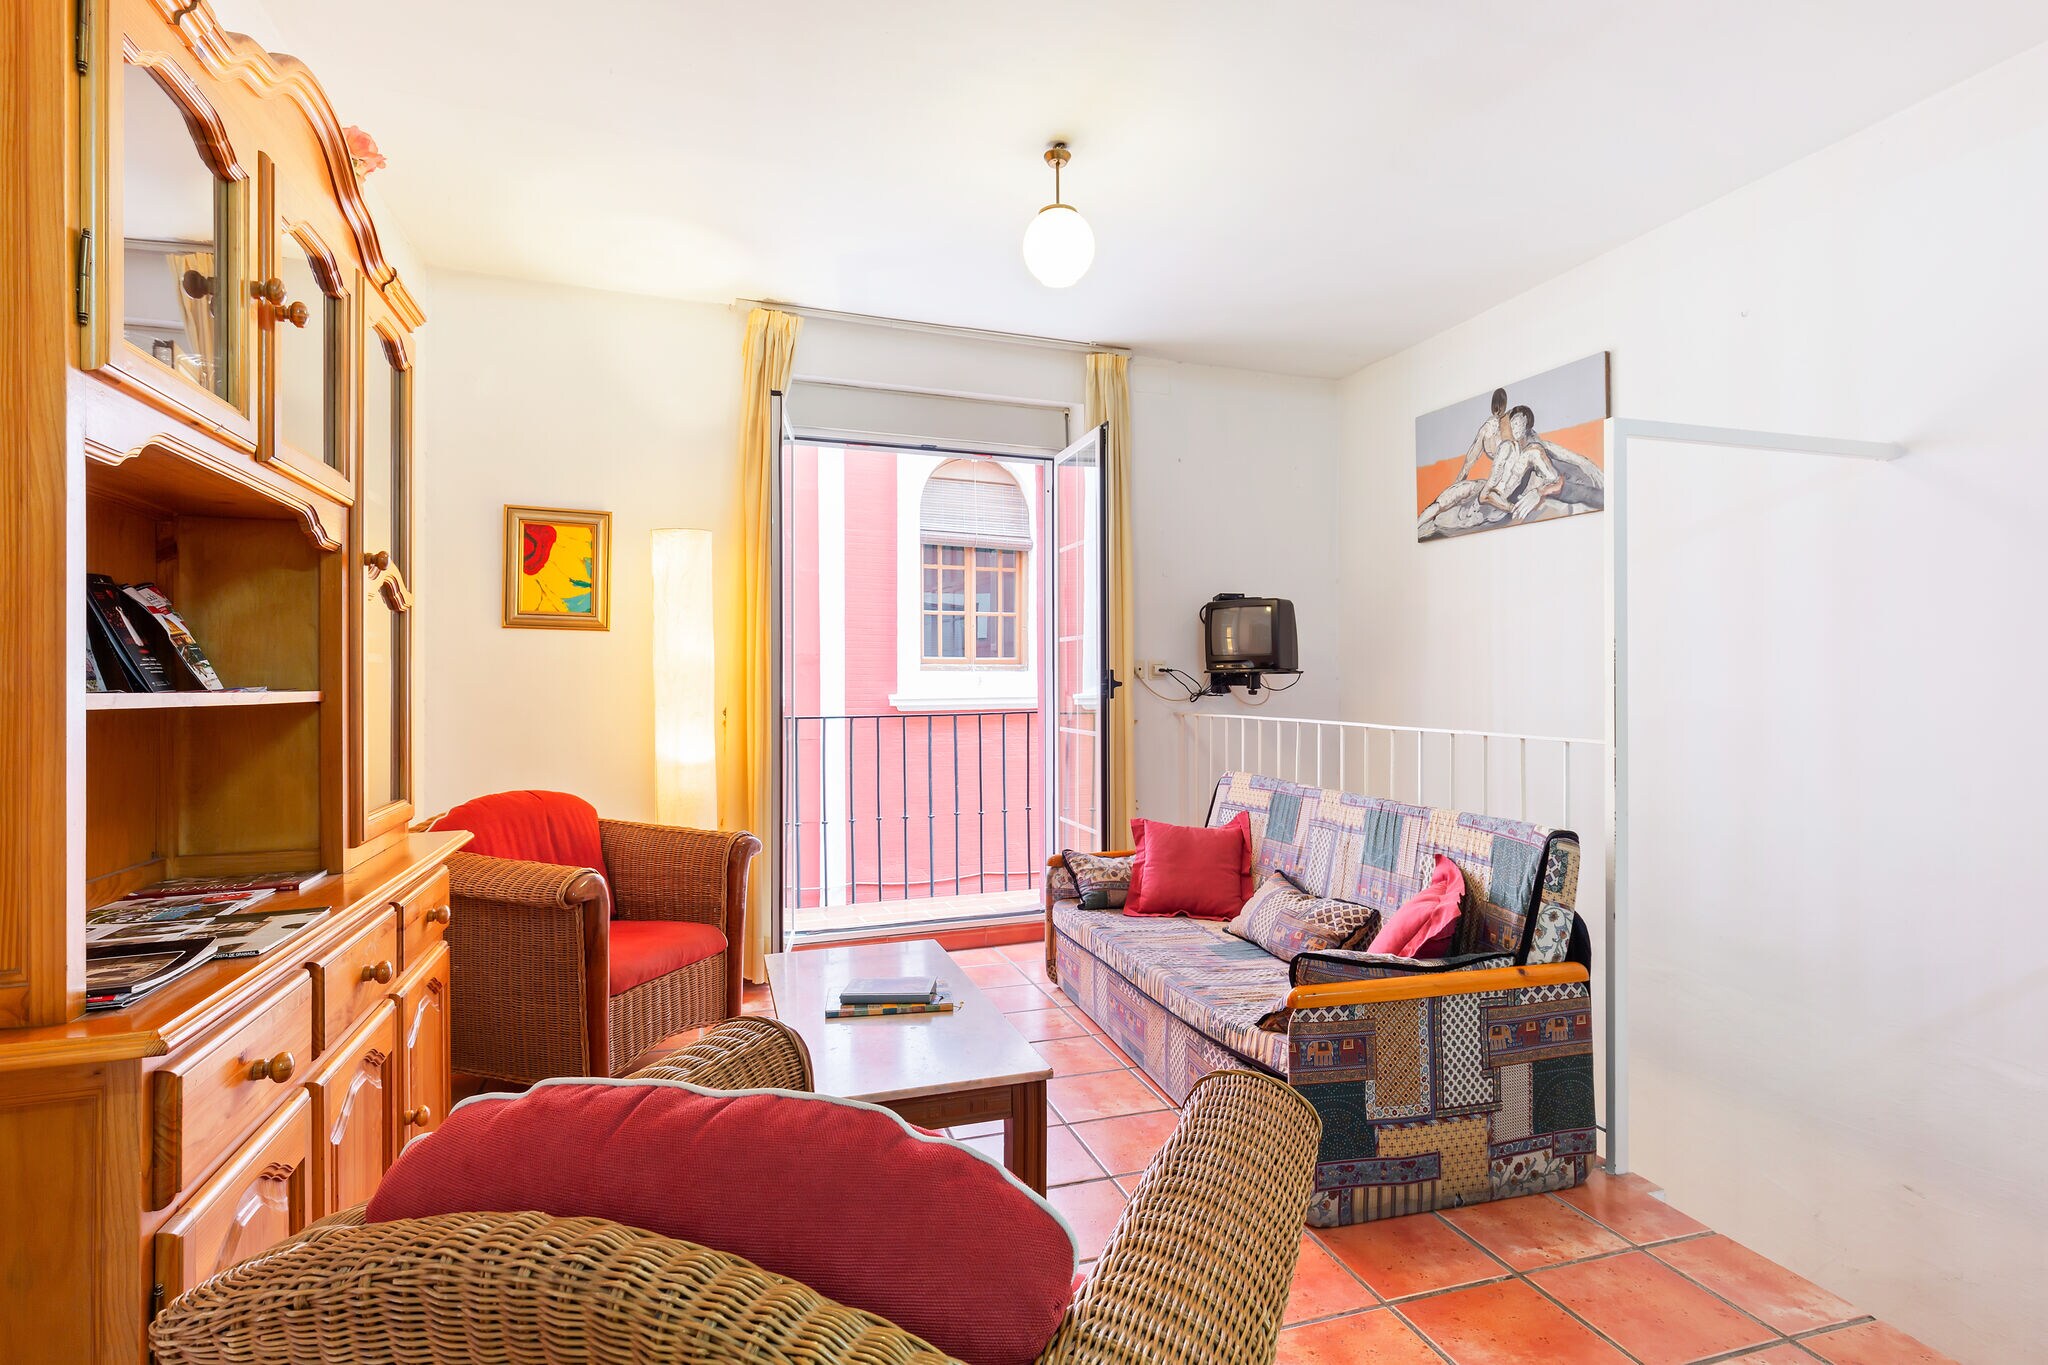 Delightful apartment situated in an old renovated premises